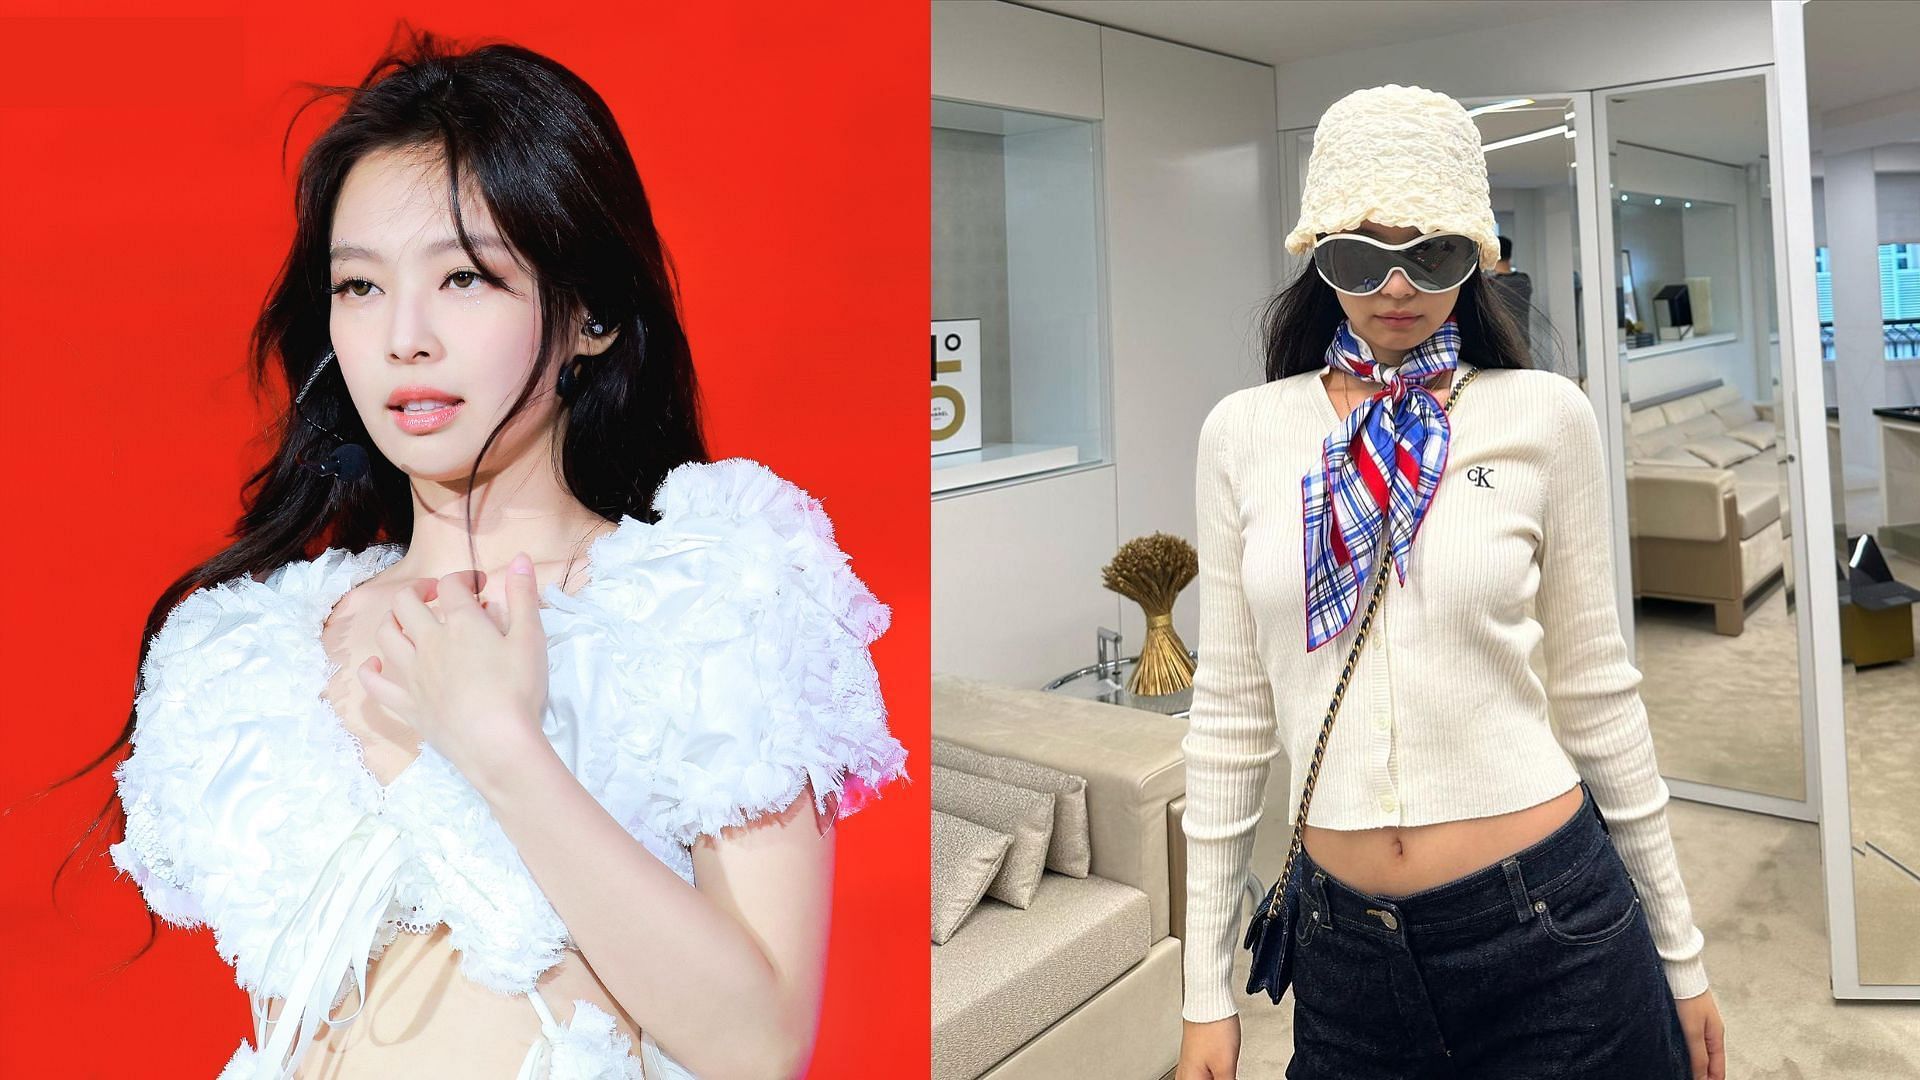 Cosplayers who?”: BLACKPINK's Jennie stirs online debate after she posts  pictures wearing same outfits from alleged Paris video with BTS' V